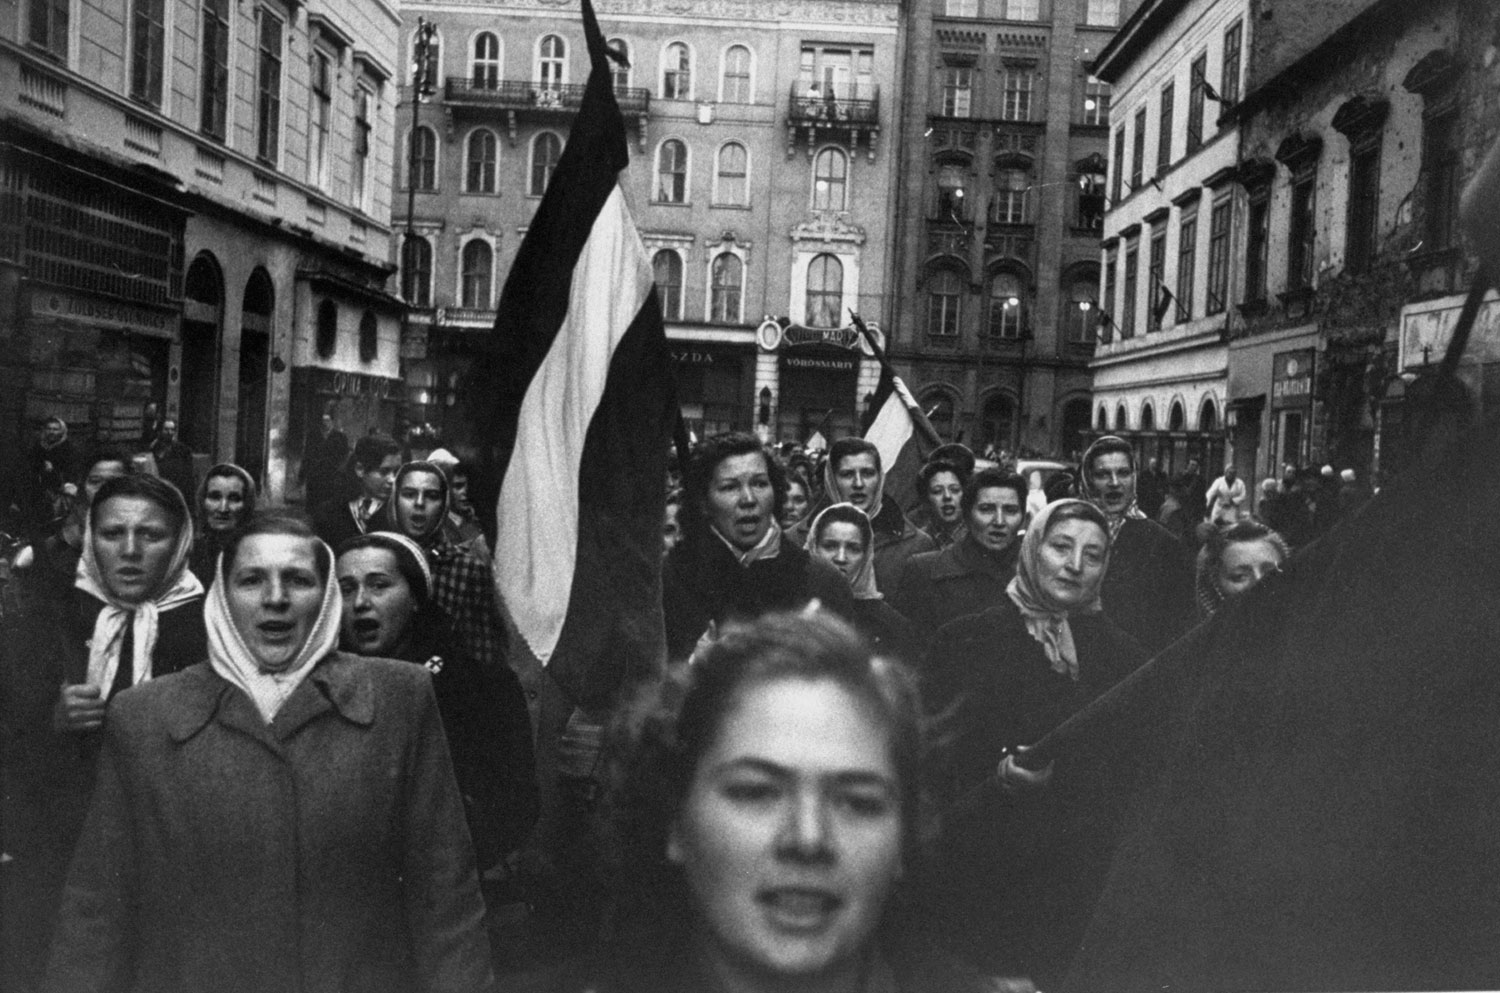 Caption from LIFE.  Carrying flags of old Hungary and singing a patriotic song, Budapest women march in honor of men who died fighting communists.